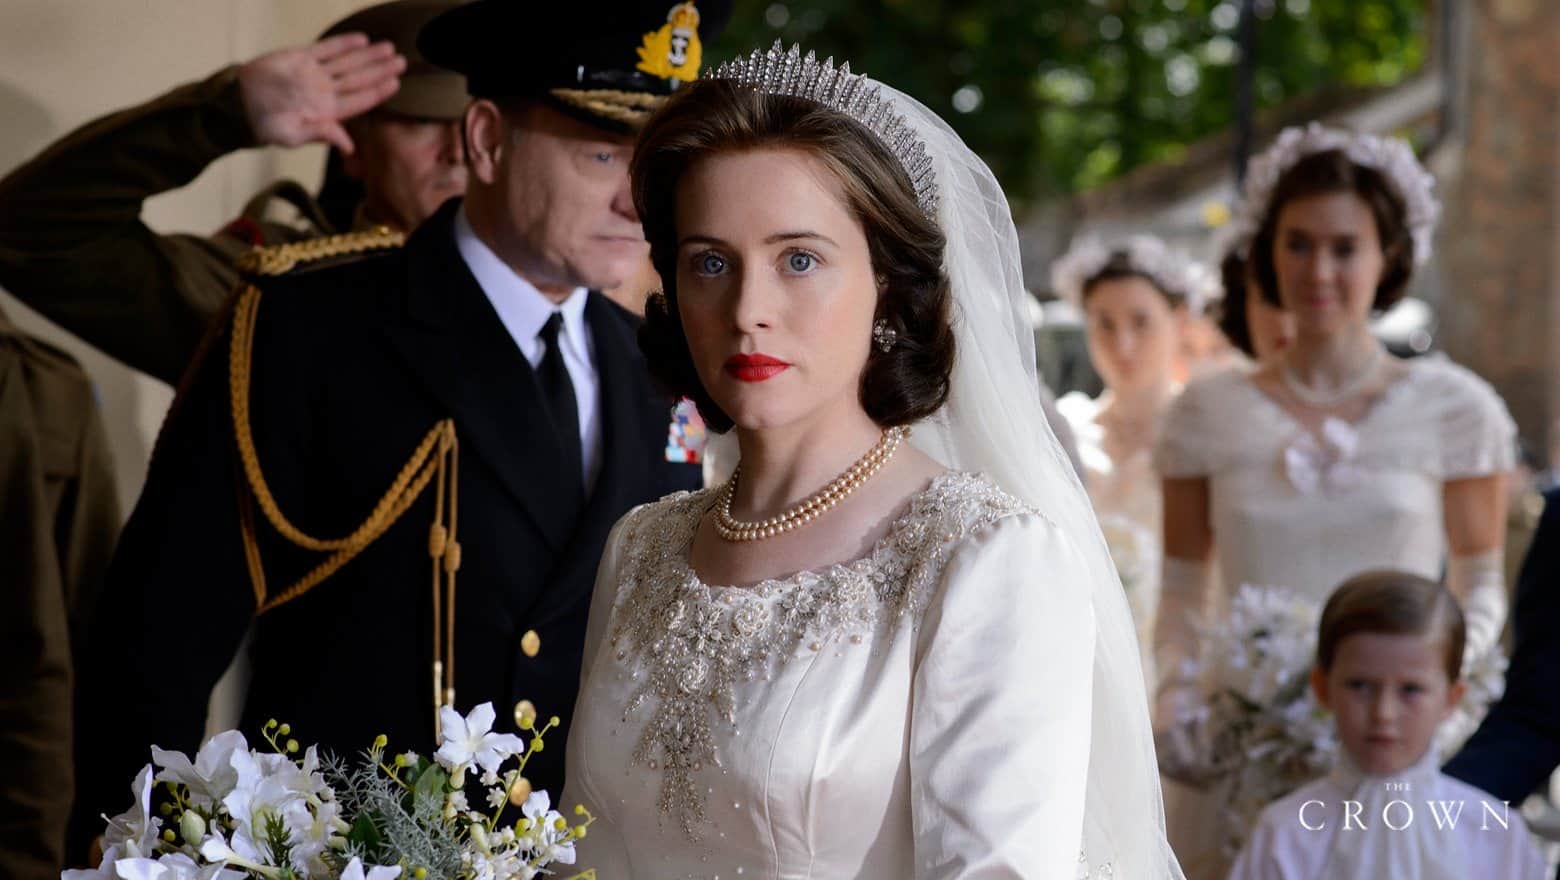 Claire Foy’s Dating History